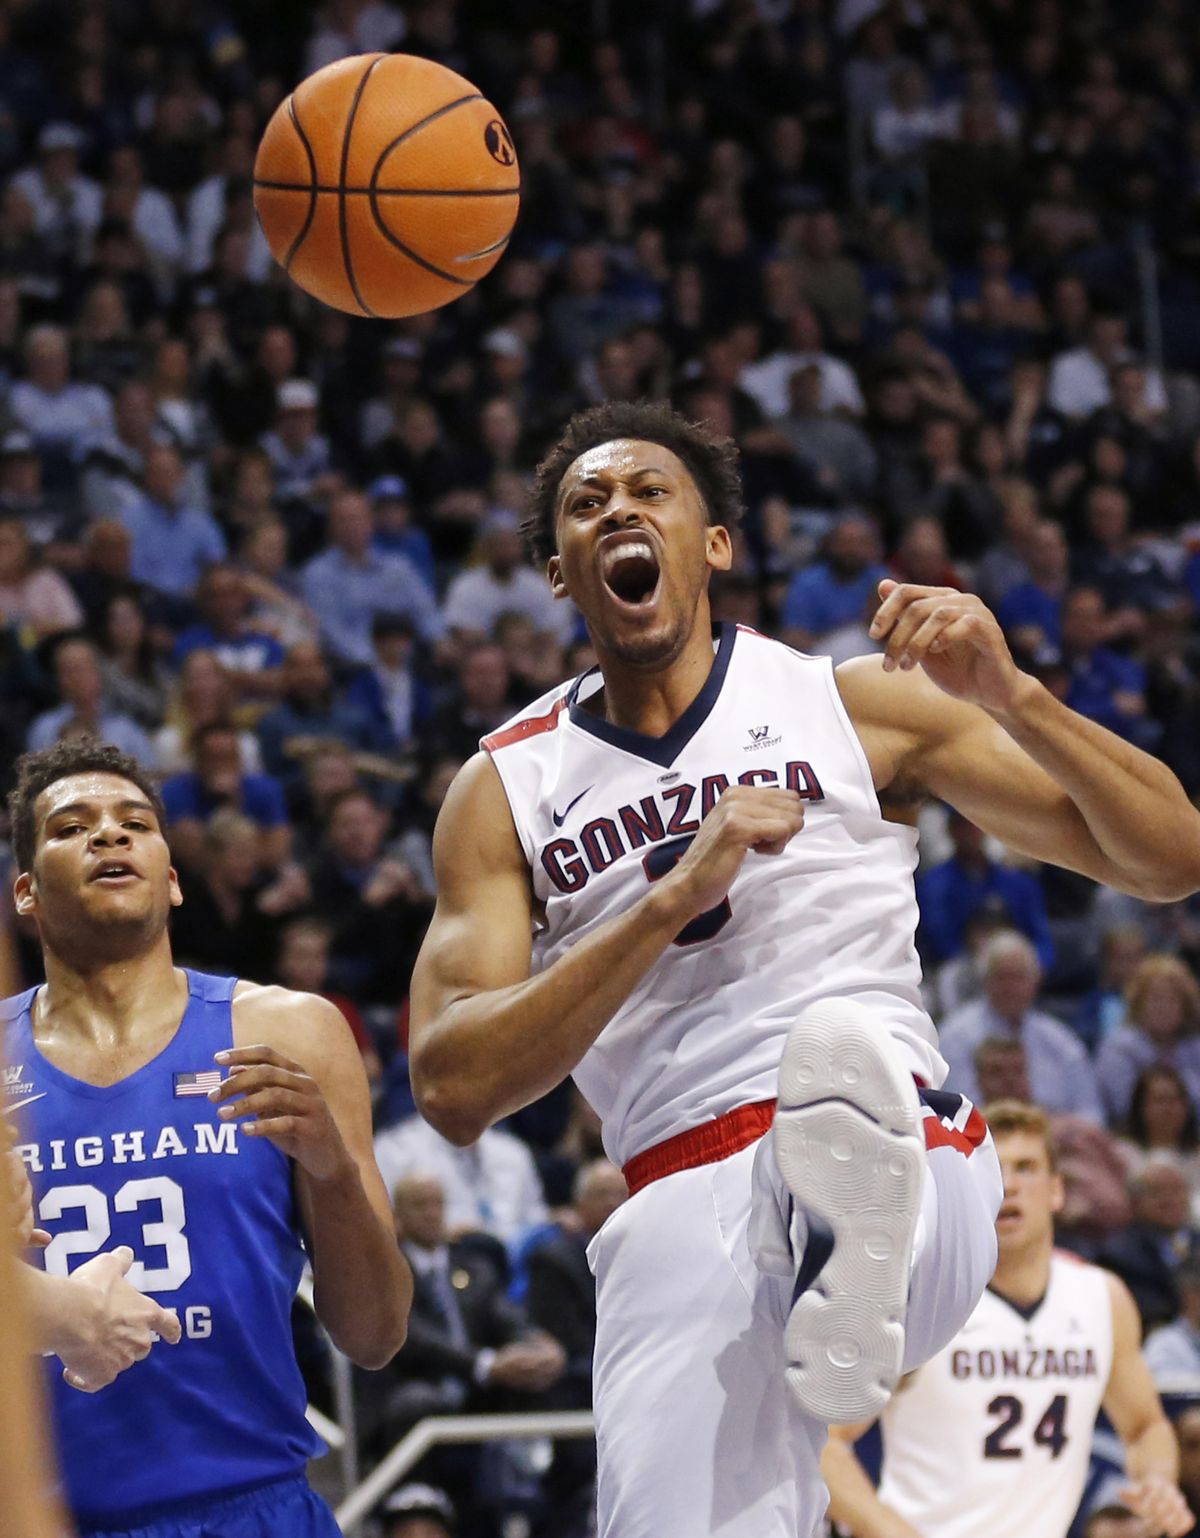 Gonzaga forward Johnathan Williams, right, reacts after dunking while BYU forward Yoeli Childs (23) watches during the first half of an NCAA college basketball game Saturday, Feb. 24, 2018, in Provo, Utah. (AP Photo/Rick Bowmer) ORG XMIT: UTRB112 (Rick Bowmer / Associated Press)